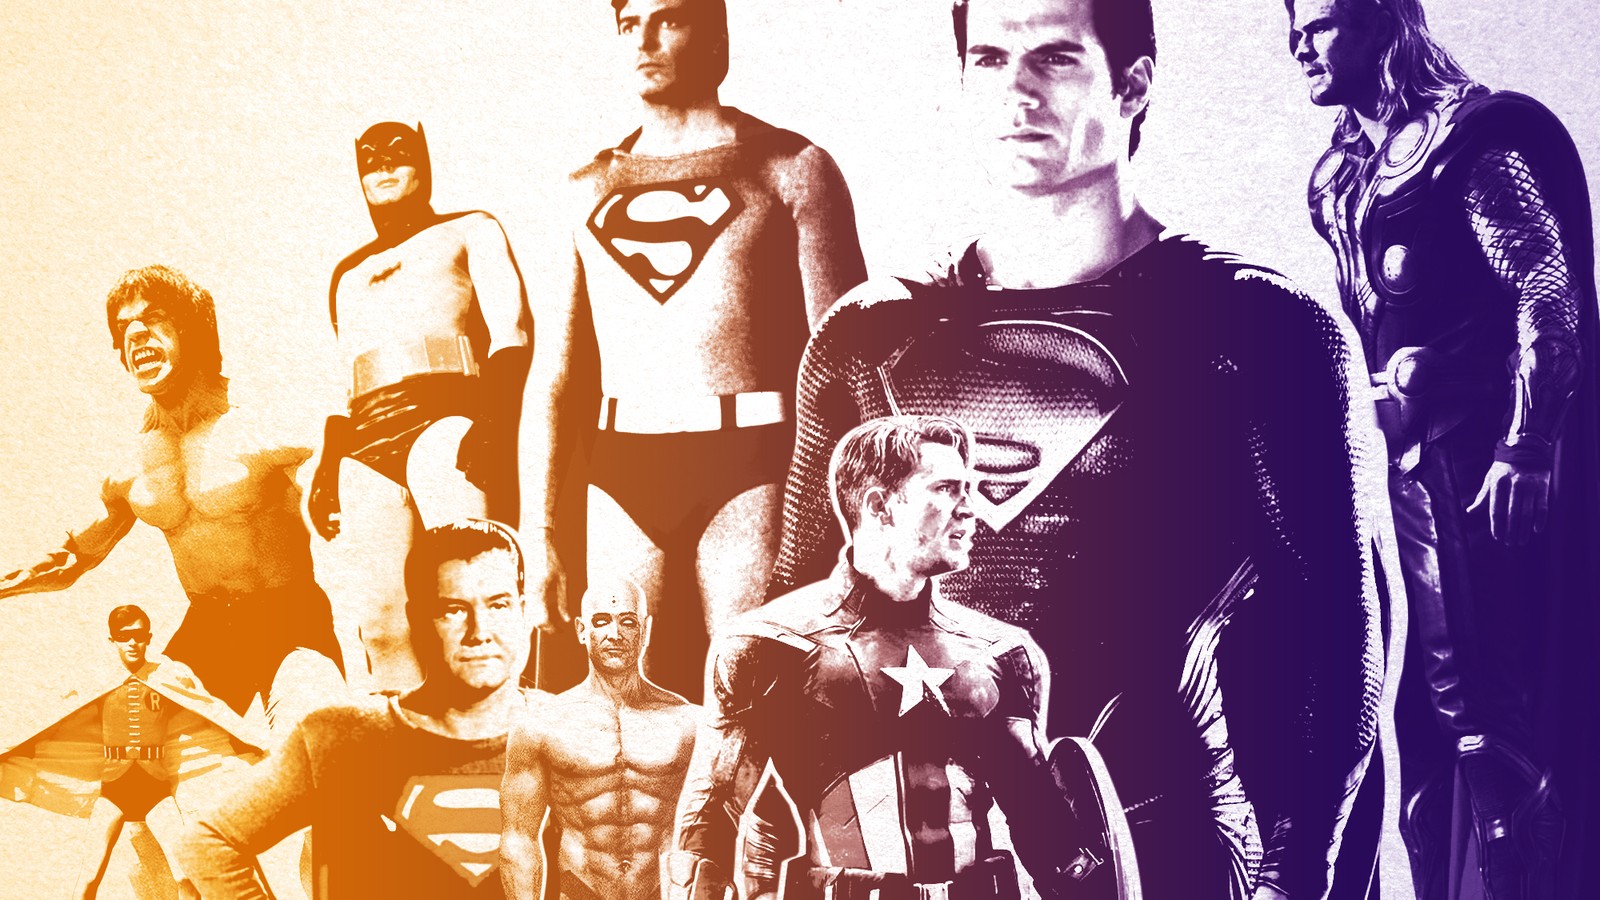 How Superhero Movies Have Influenced Pop Culture and the World